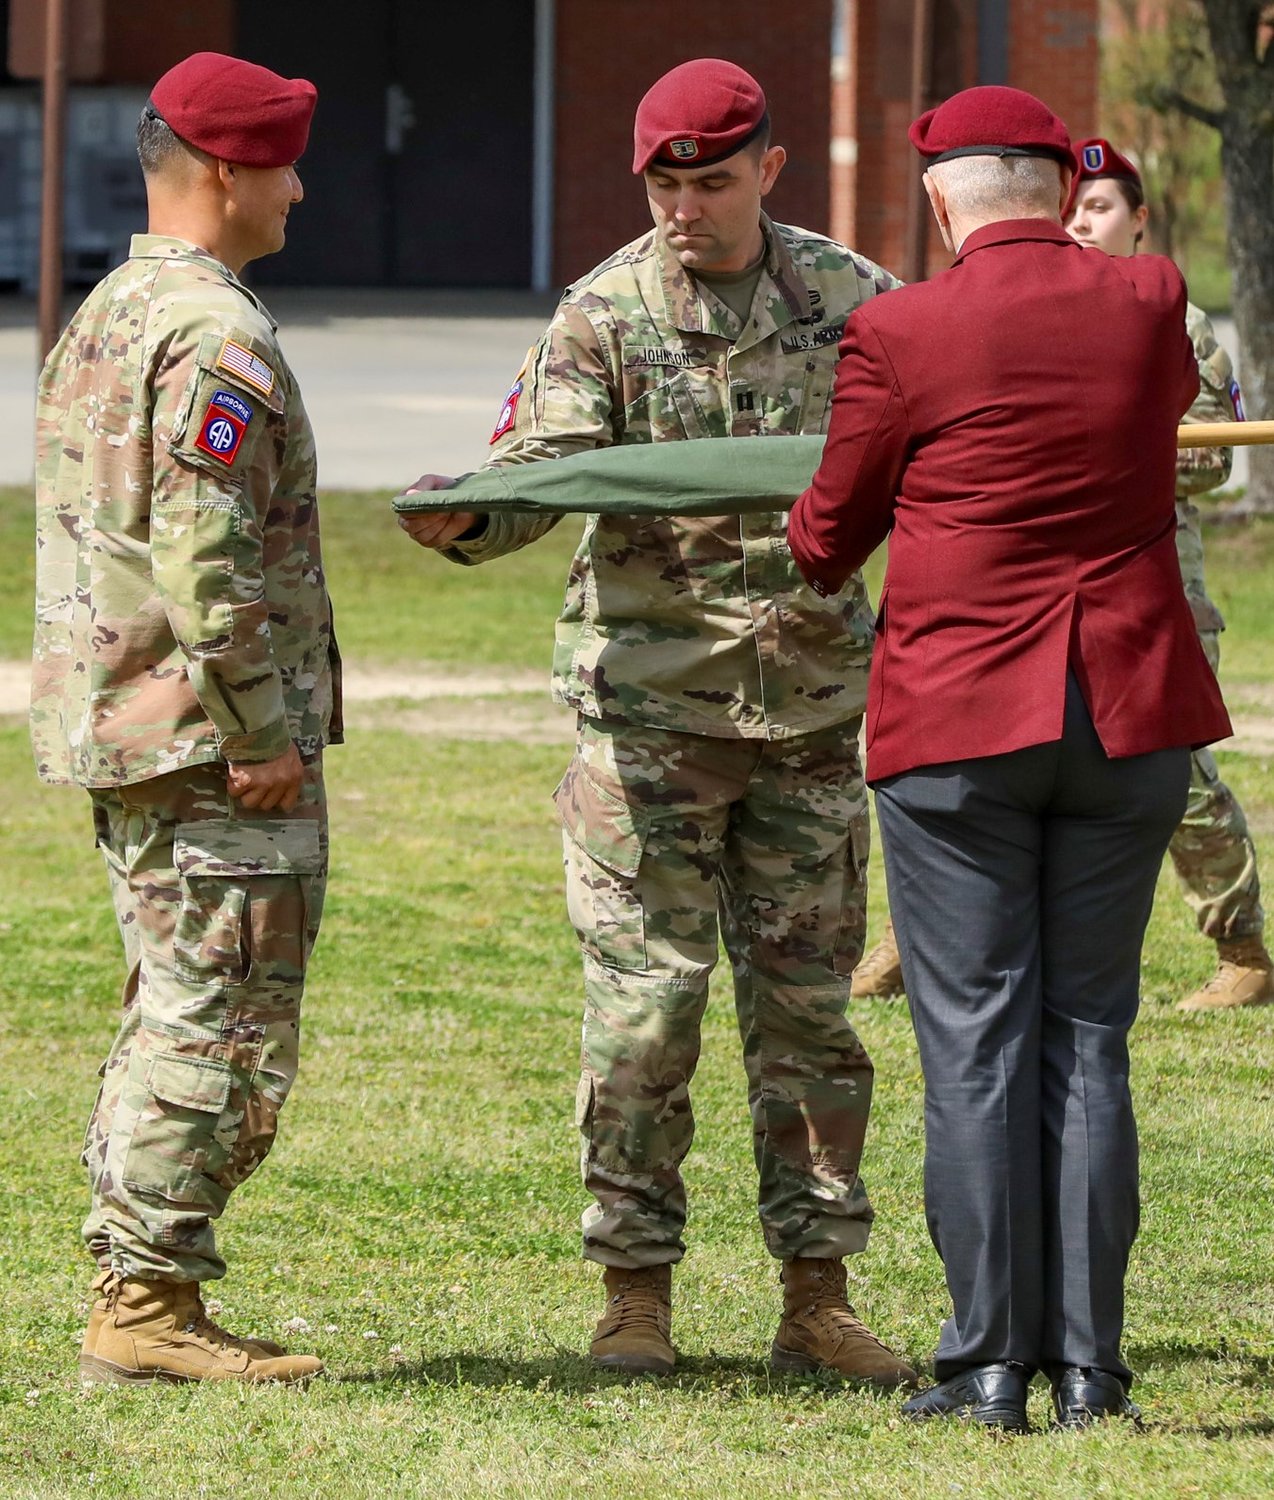 Capt. Adam Johnson, commander of Gainey Company, Headquarters and Headquarters Battalion, 82nd Airborne Division, uncases the guidon during a ceremony on Fort Bragg on Wednesday.